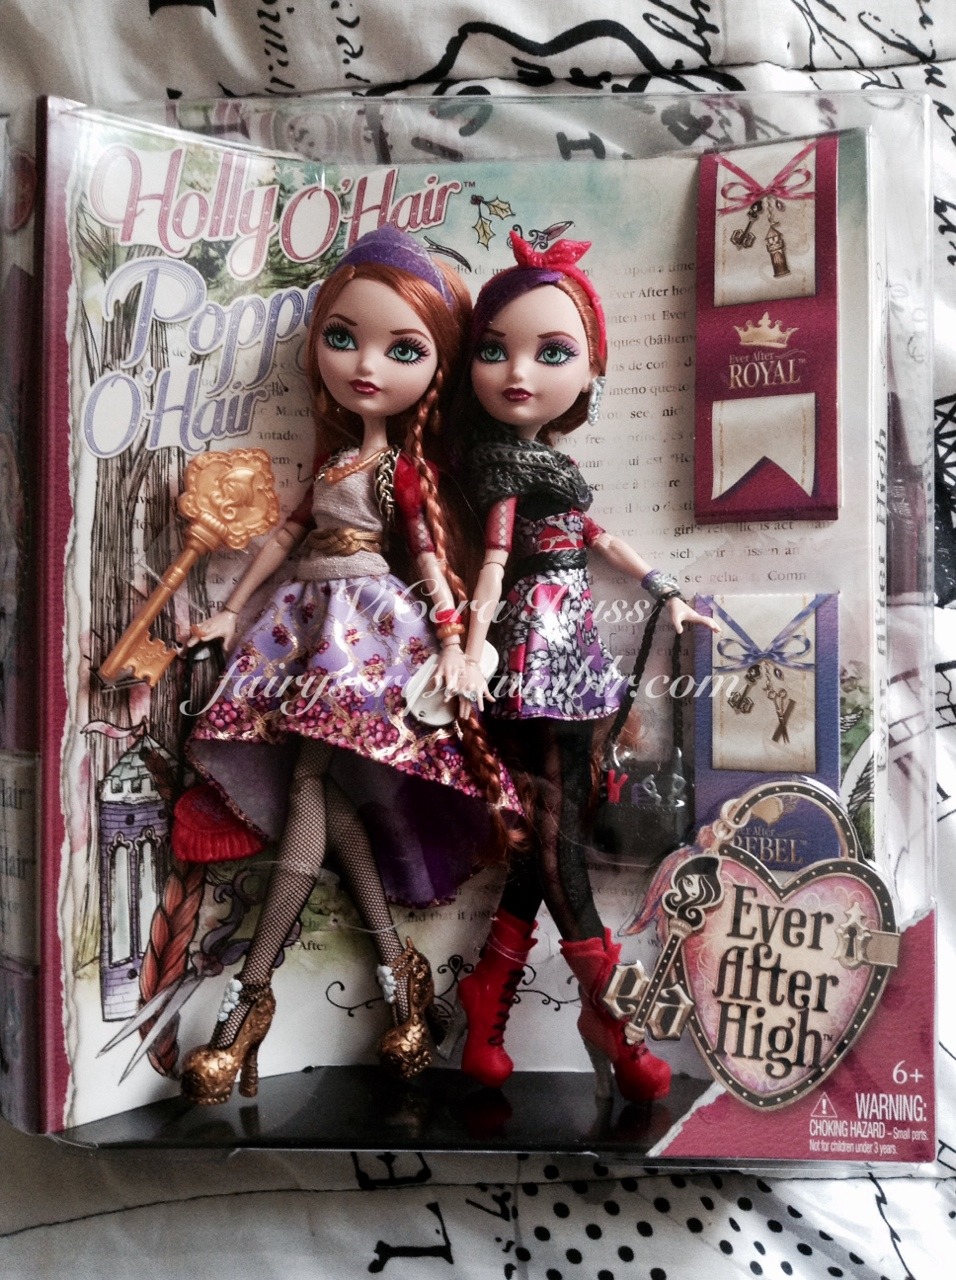 kaylin-de-nile:

fairyscript:

These lovely ladies arrived today! I adore them both! 🌸
(Gonna give Poppy’s hair a rinse, the amount of gel in it is ridiculous. Holly’s hair was perfect right out of the box, that figures lol)

Ee! So happy for you - they’re lovely! Take lots of pictures for me please! 💖🌺
